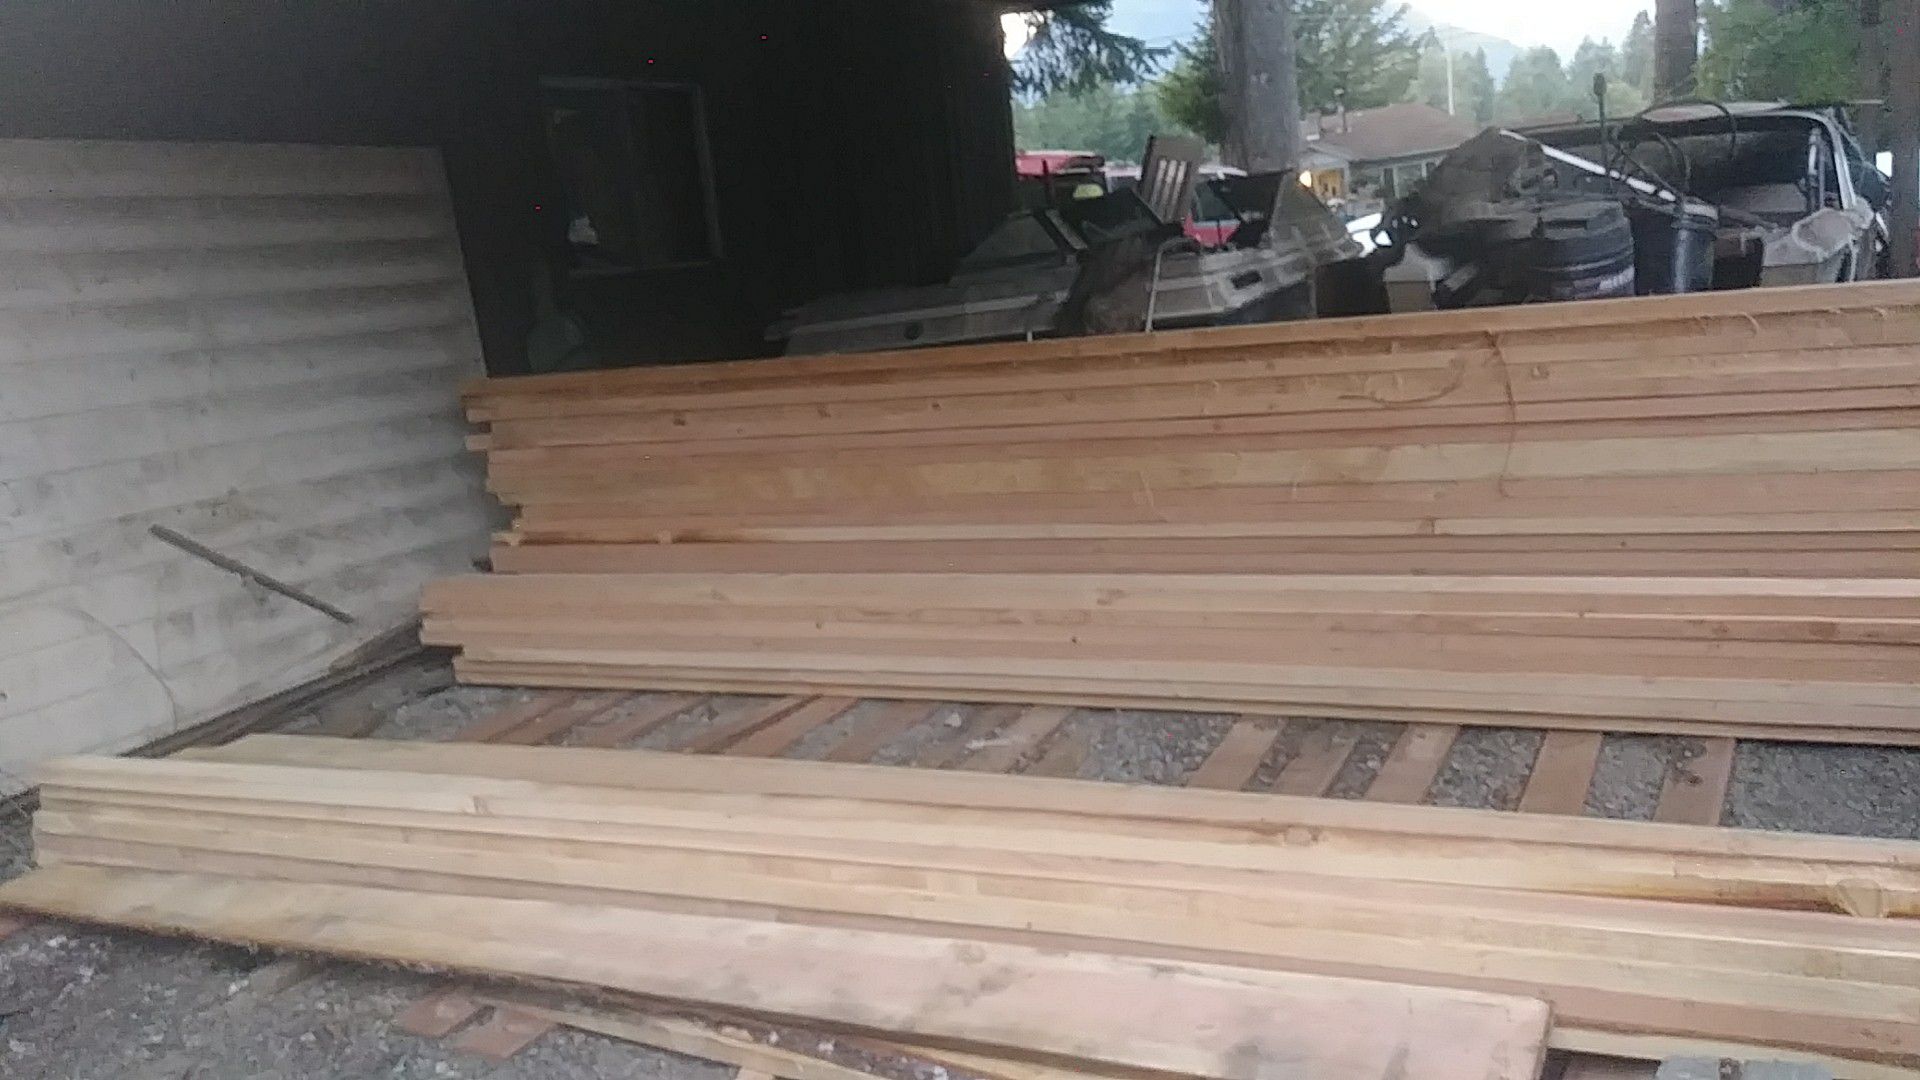 Rough cut lumber for sale 2x4-2x6-2x8-2x10-2x12-4x4-6x6-4x12. I also cut orders just email me what you need and I'll get back to you with a price.